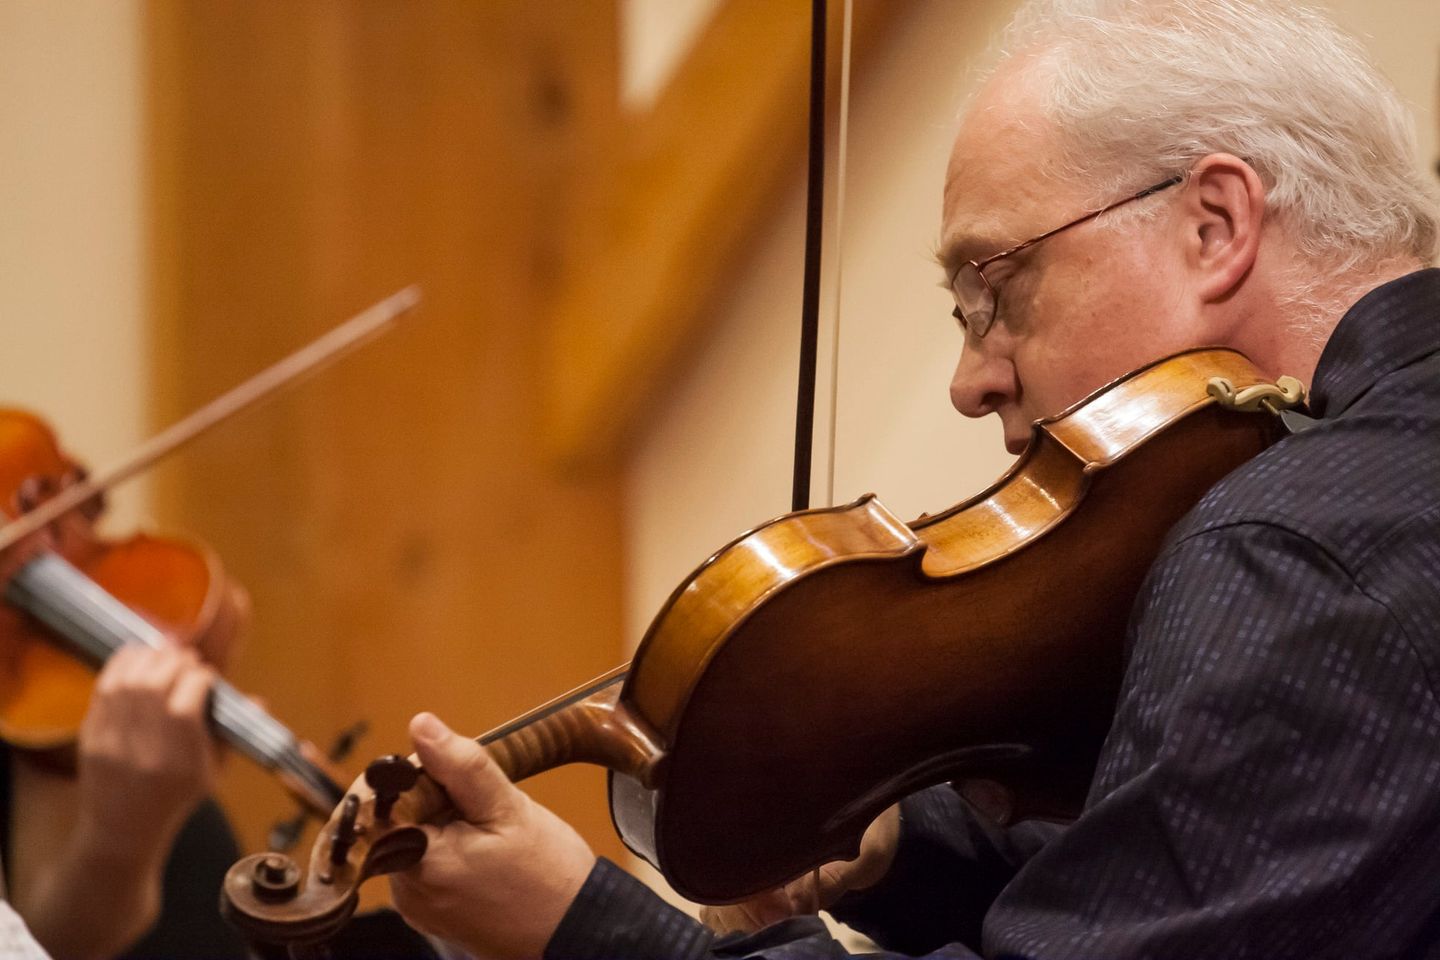 String quartets grieve for inspirational Tapping